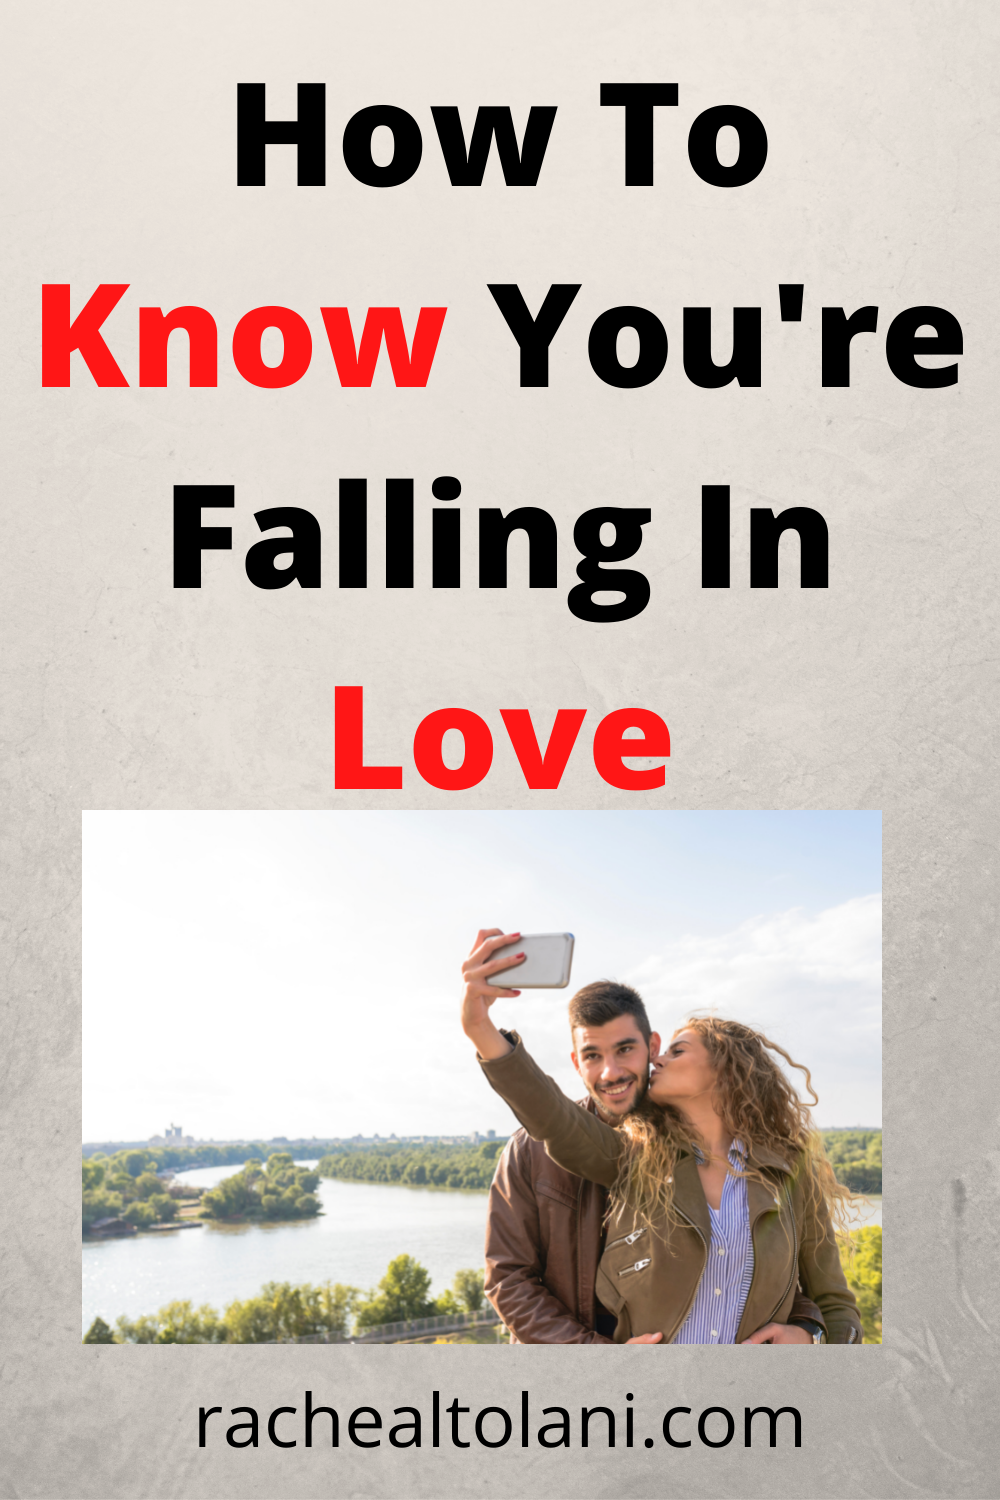 How to know you are falling in love